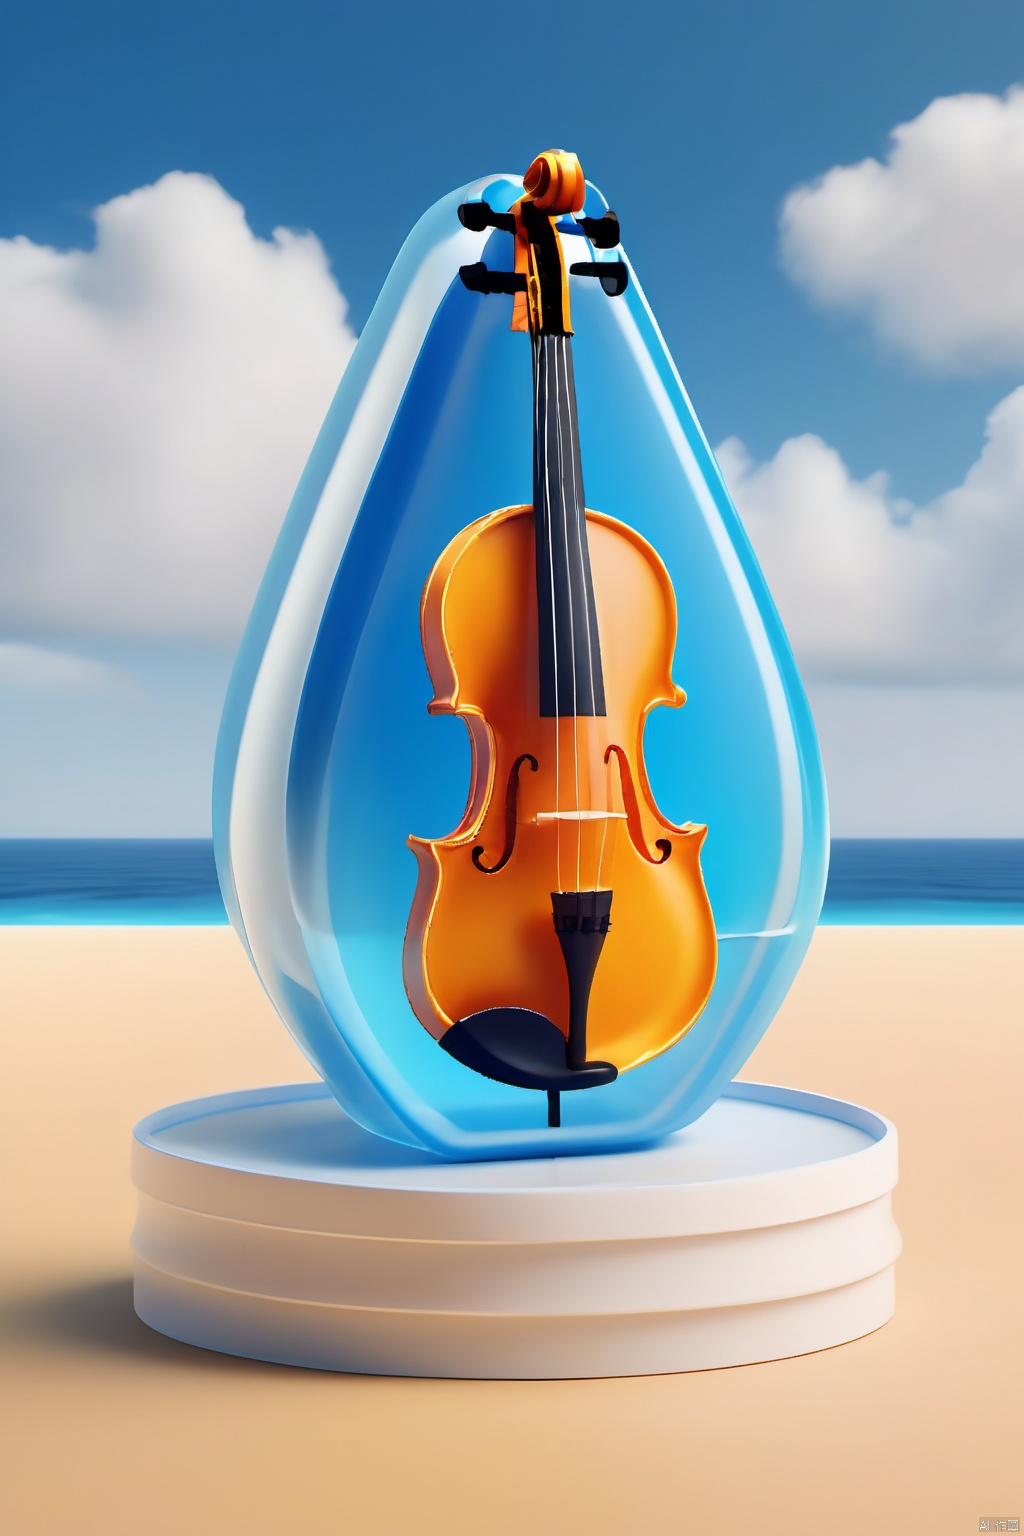 A violin shaped container with a sea World,Sunny beach,Cheesy milk-covered clouds,HD 8K,in realistic and ultra detailed rendering styles, C4D, octane rendering, behance, Surrealism, 3dIcon